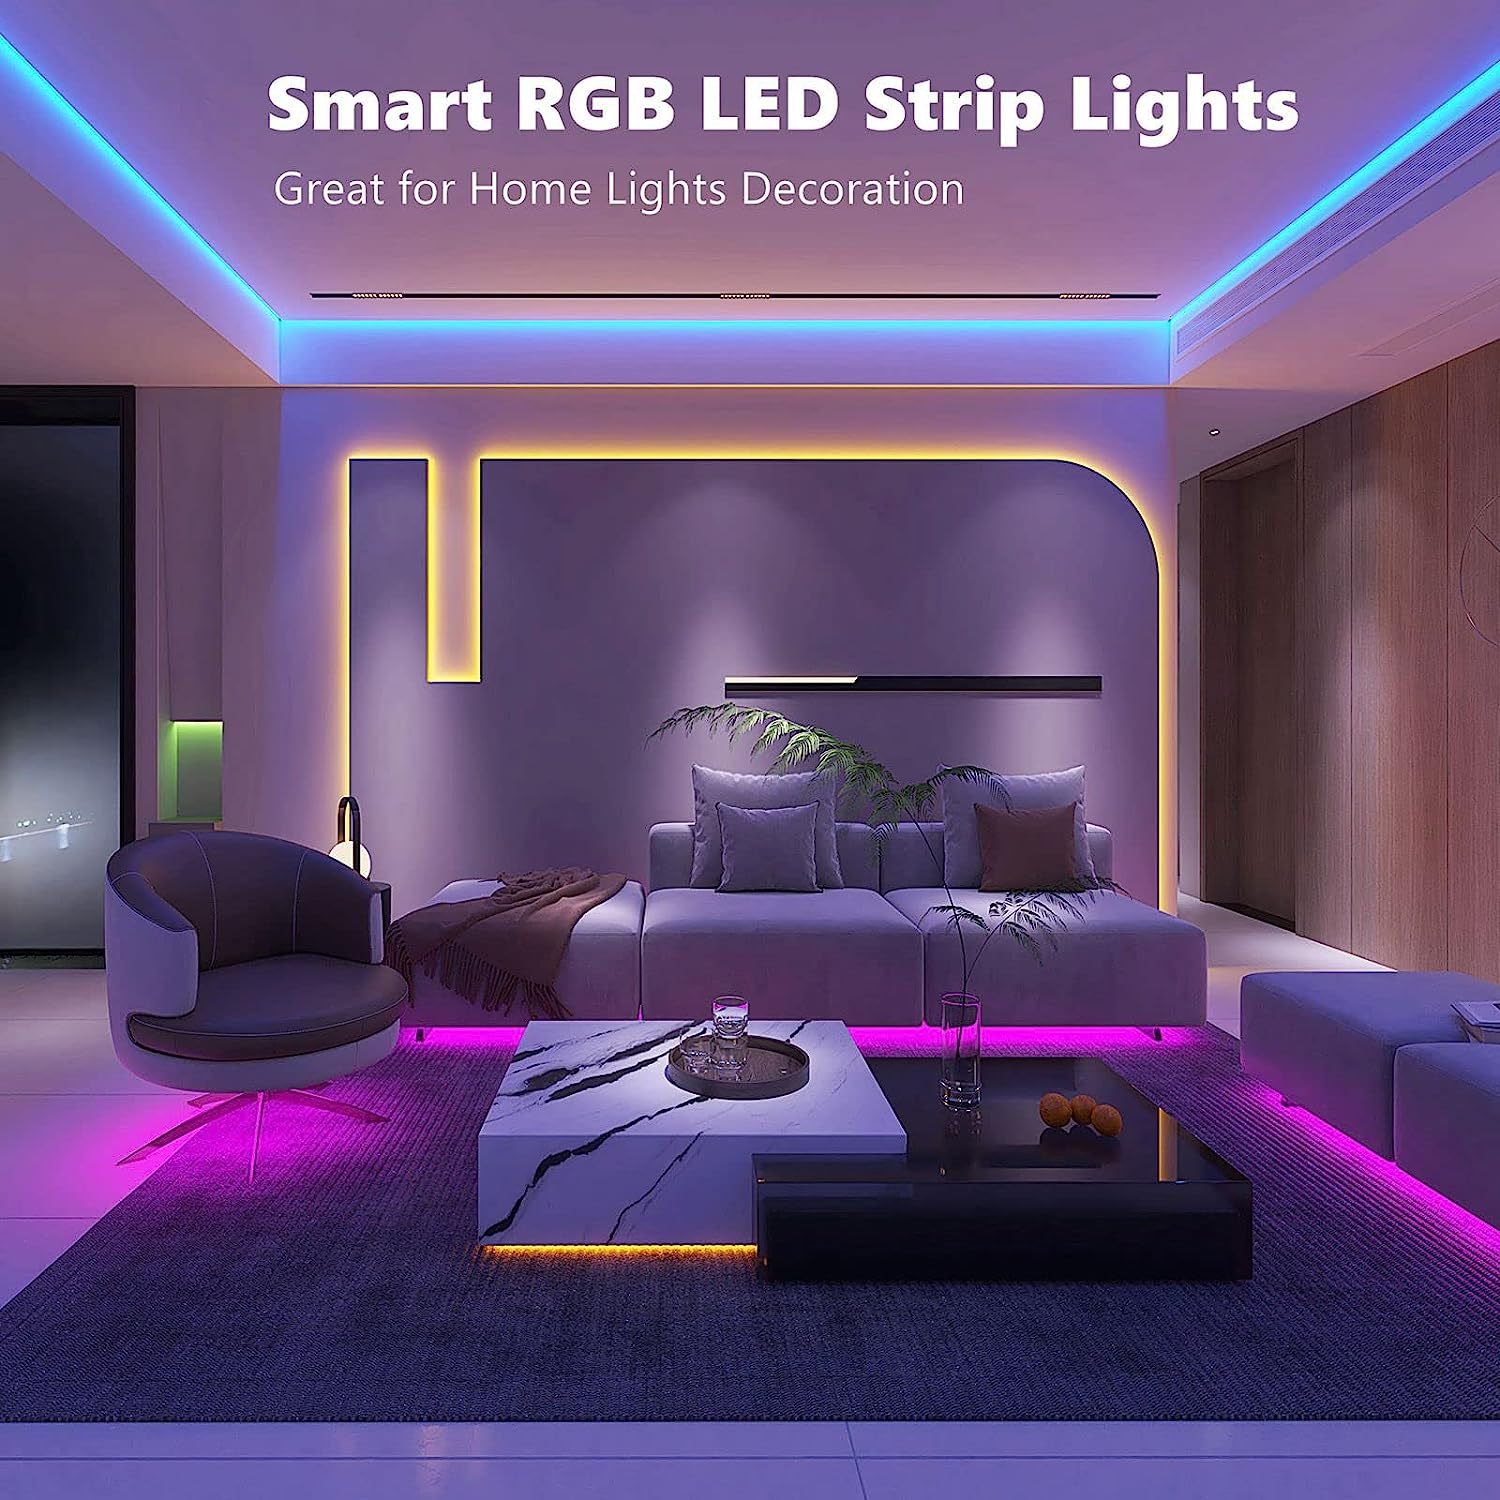 40m 130ft led lights for bedroom 2 rolls of 65ft smart rgb led strip lights with 44 keys remote control and app control music sync lights color changing lights for home party halloween christmas decorative light strip details 1